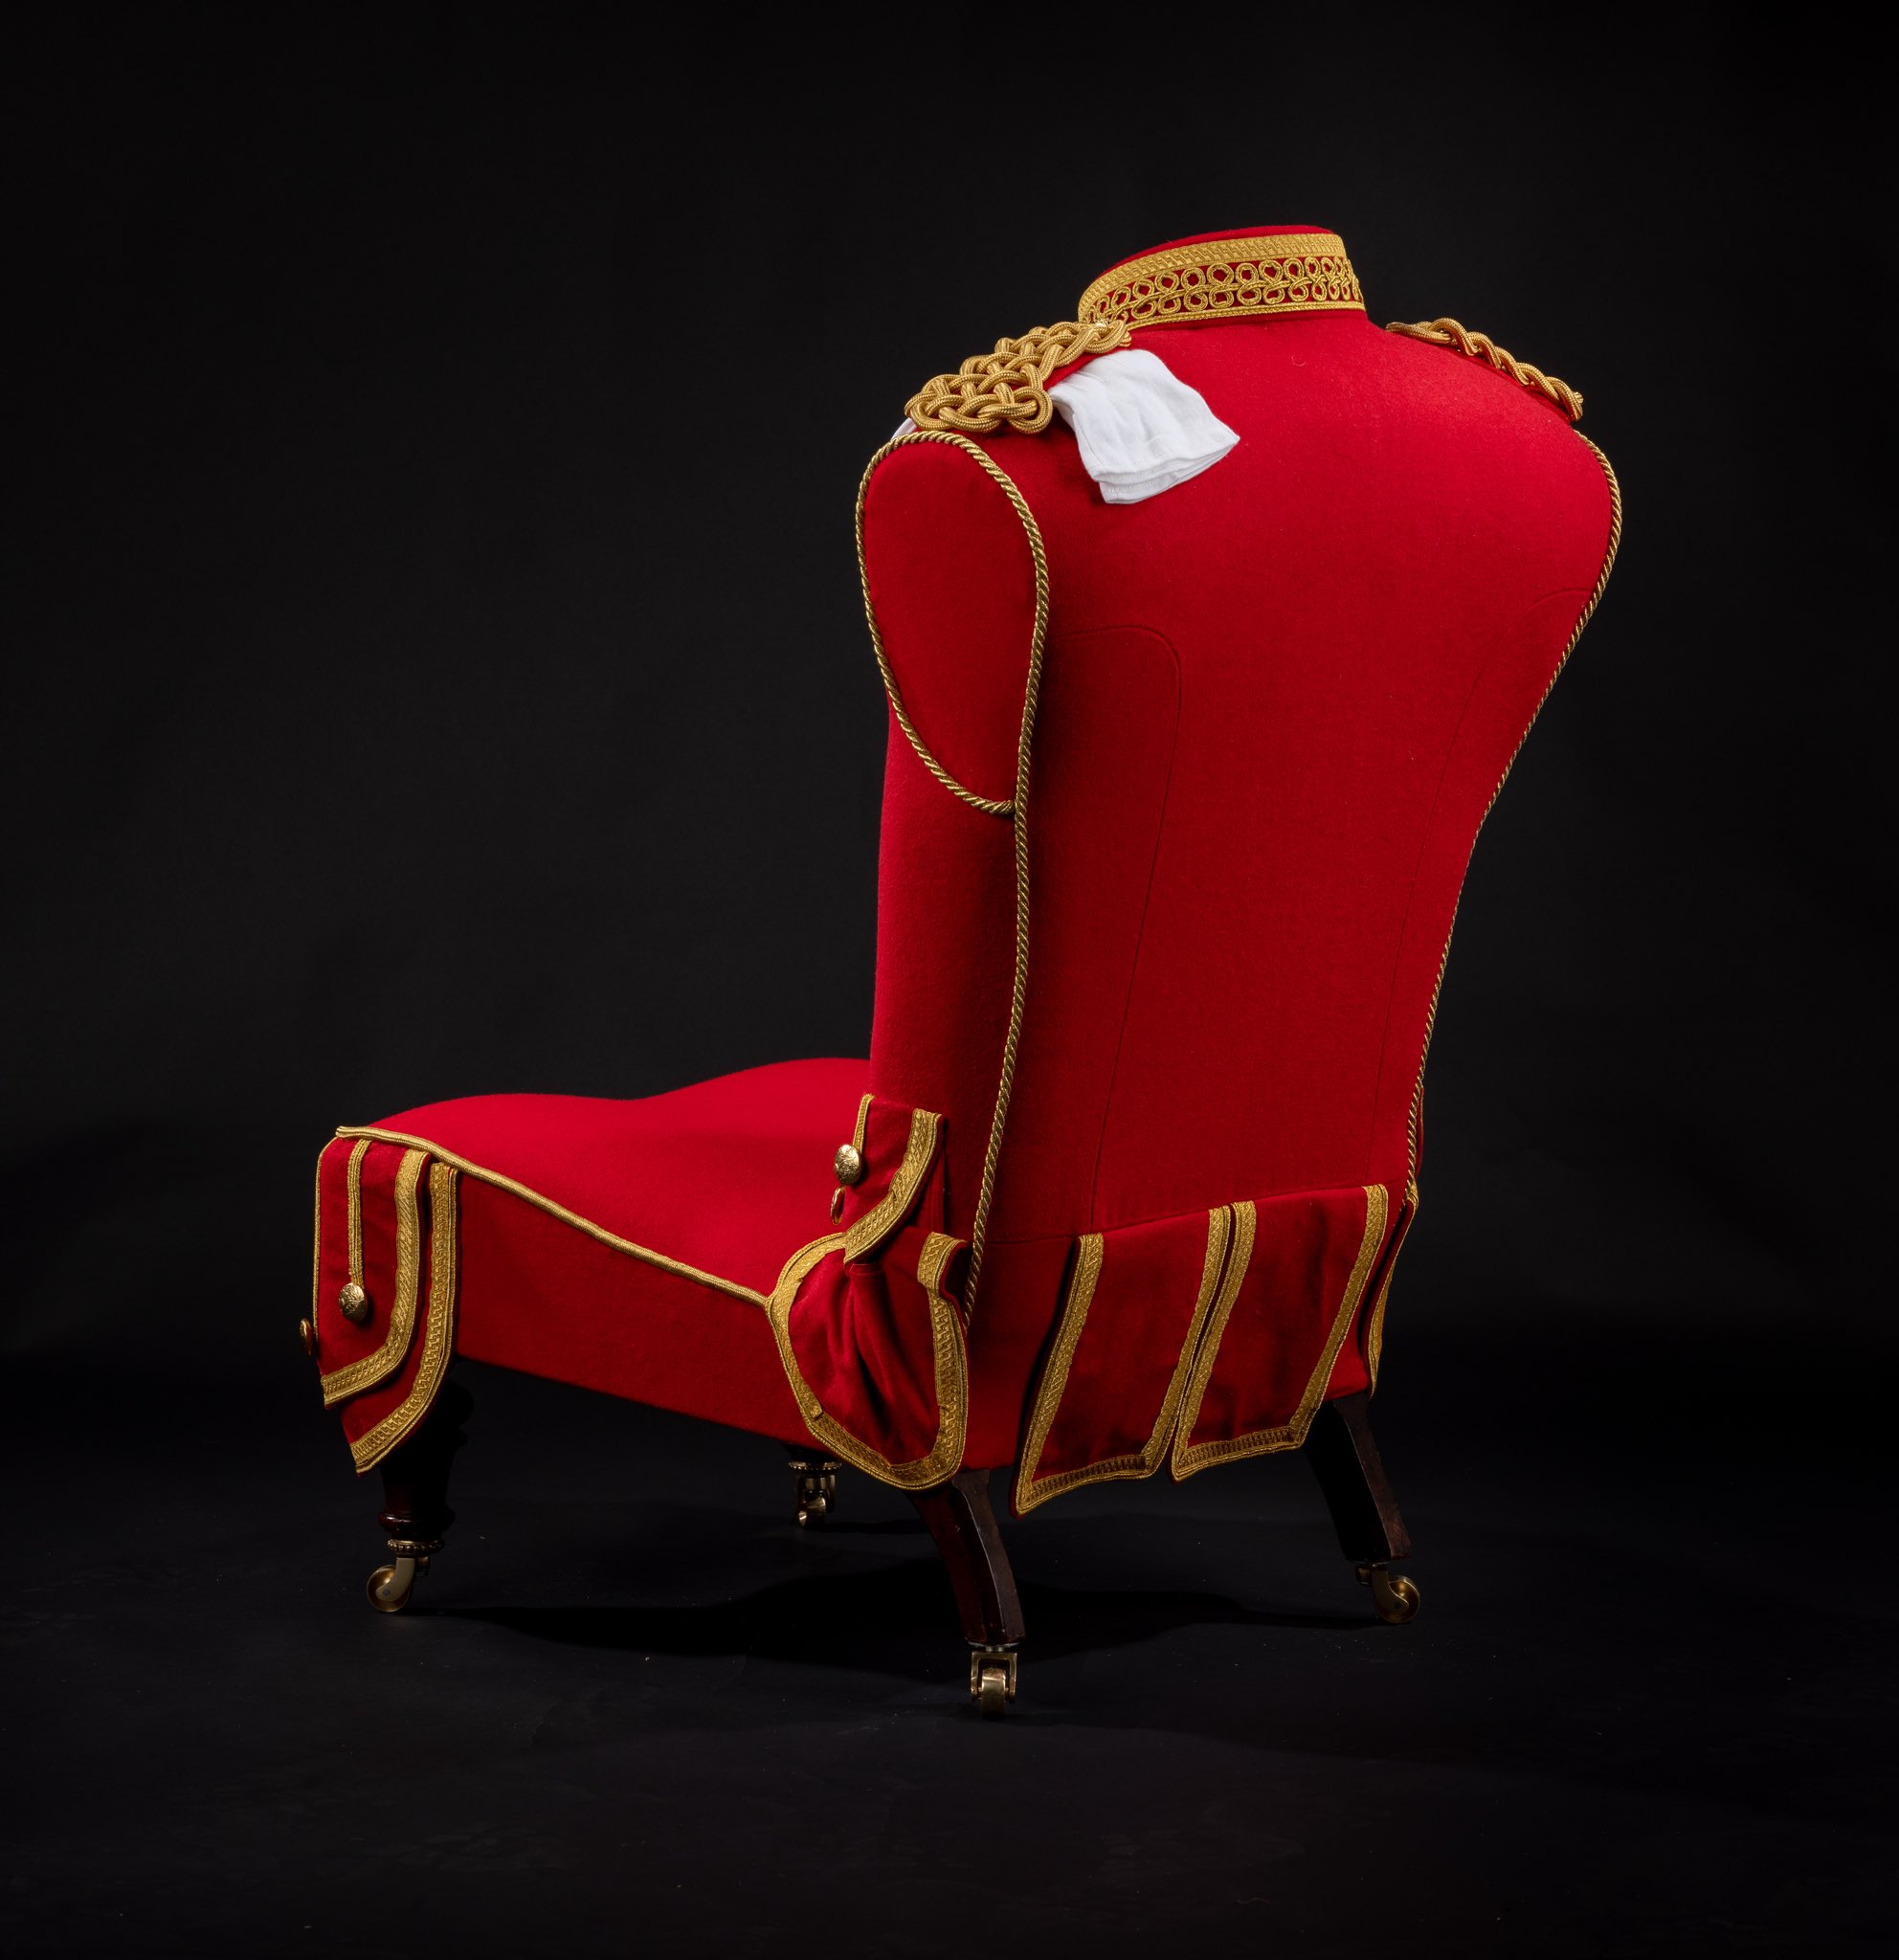 shaun brownell ©️ on twitter "'the maharaja chair